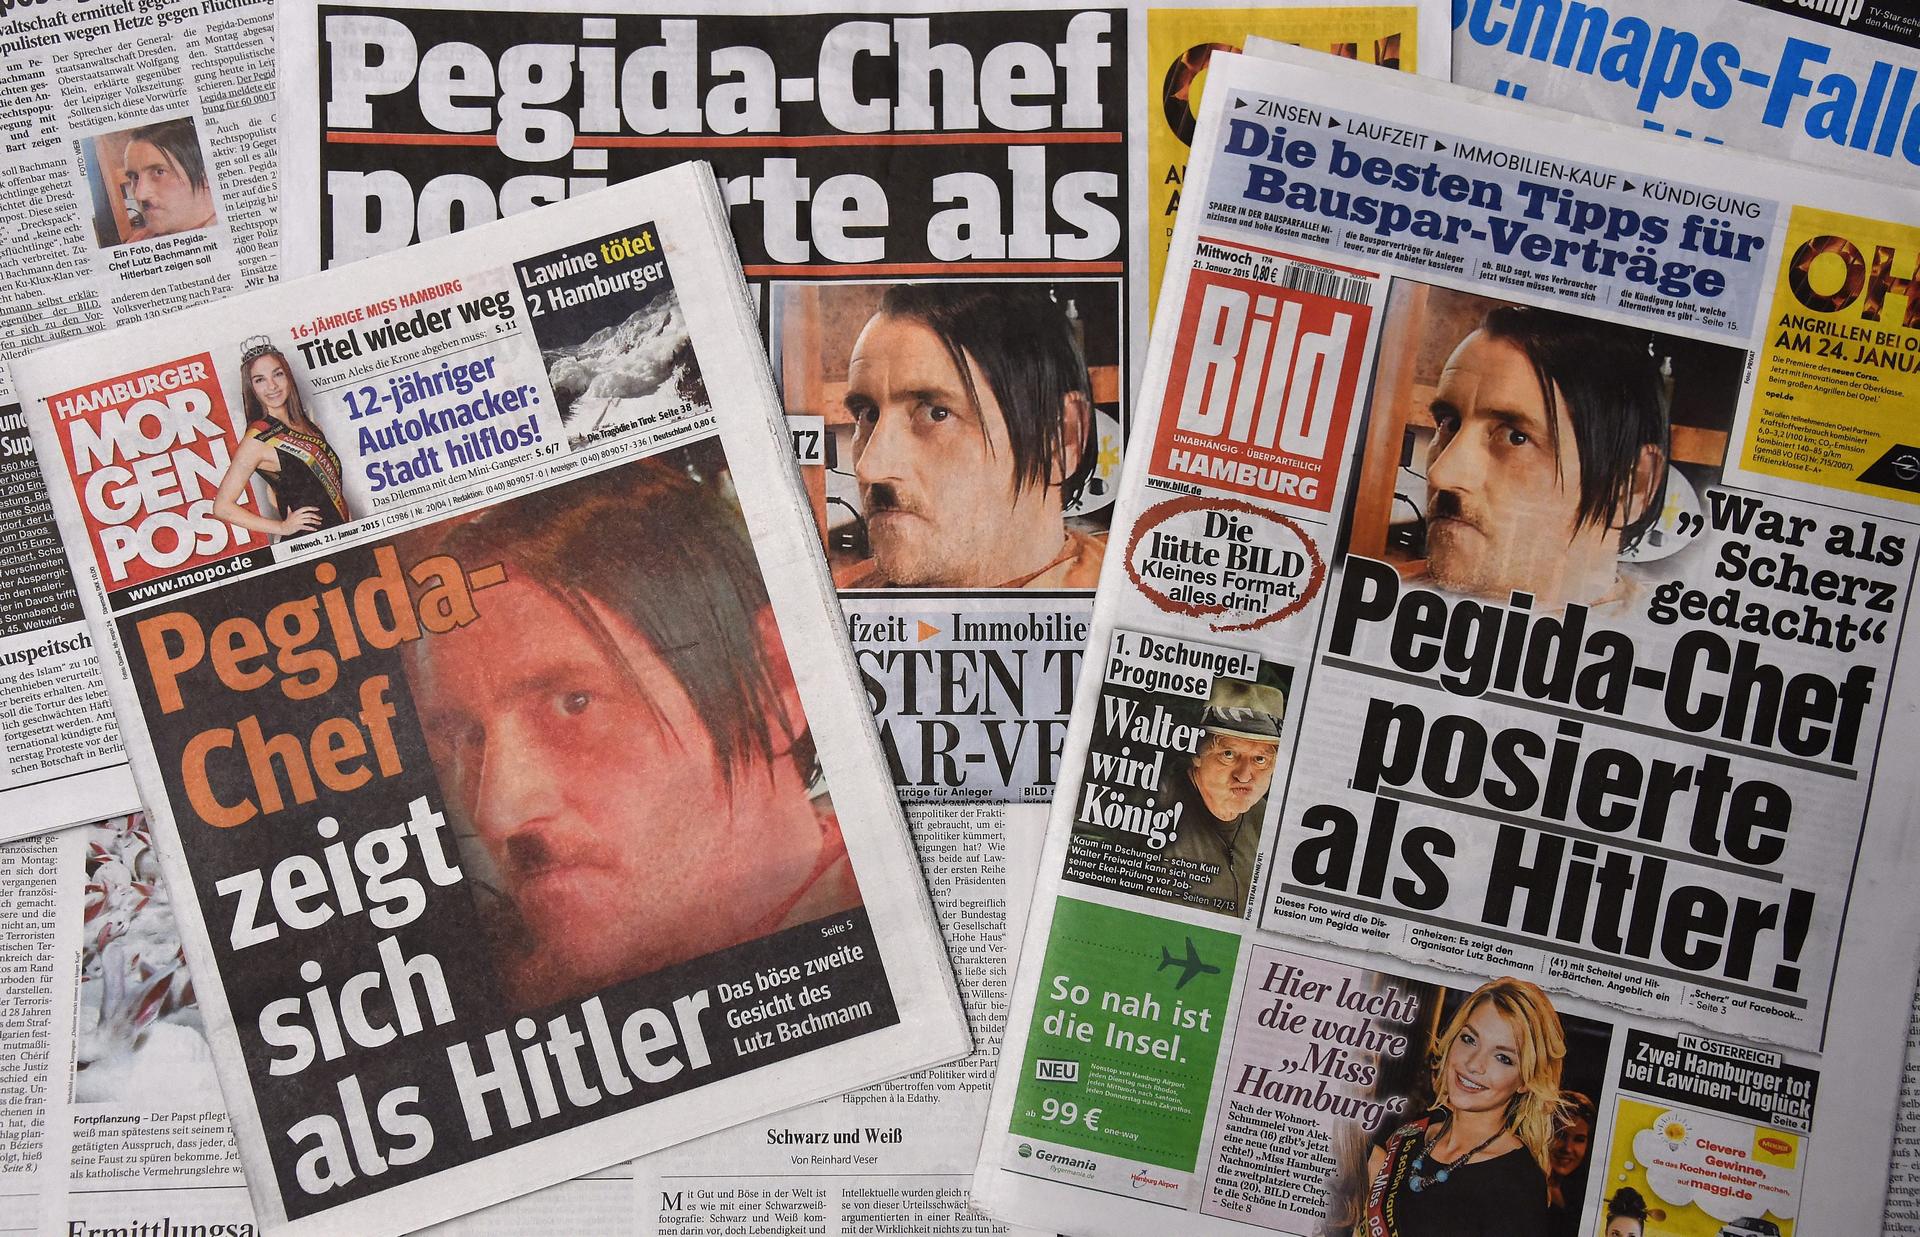 Newspapers show the picture of Lutz Bachmann posing as Adolf Hitler. Photo: EPA